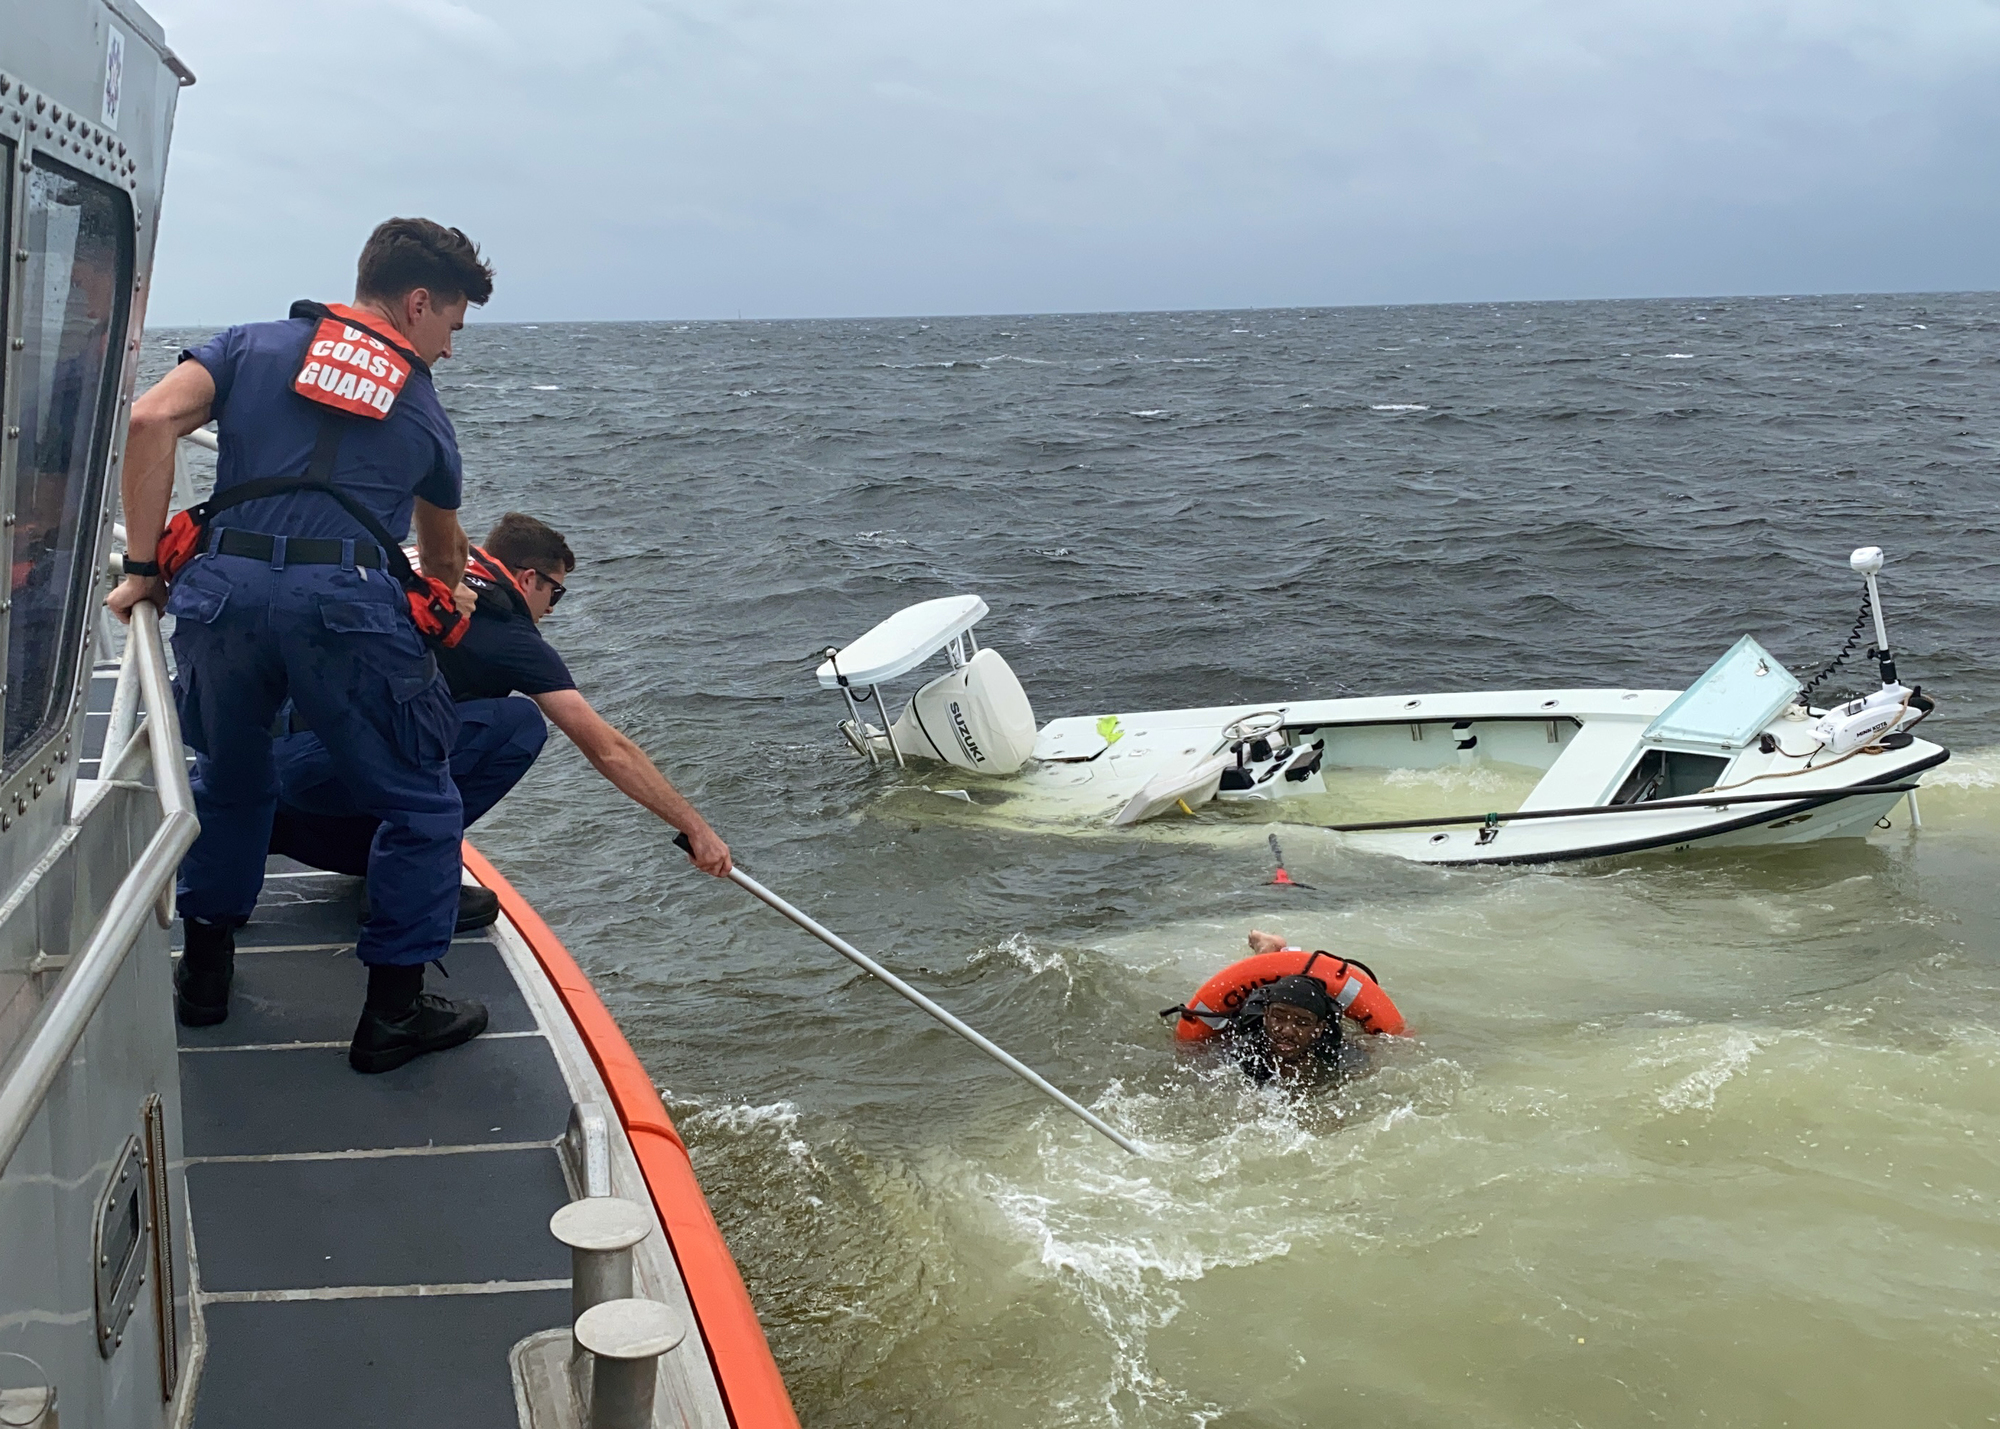  Coast Guard rescues man from sinking vessel Tampa Bay